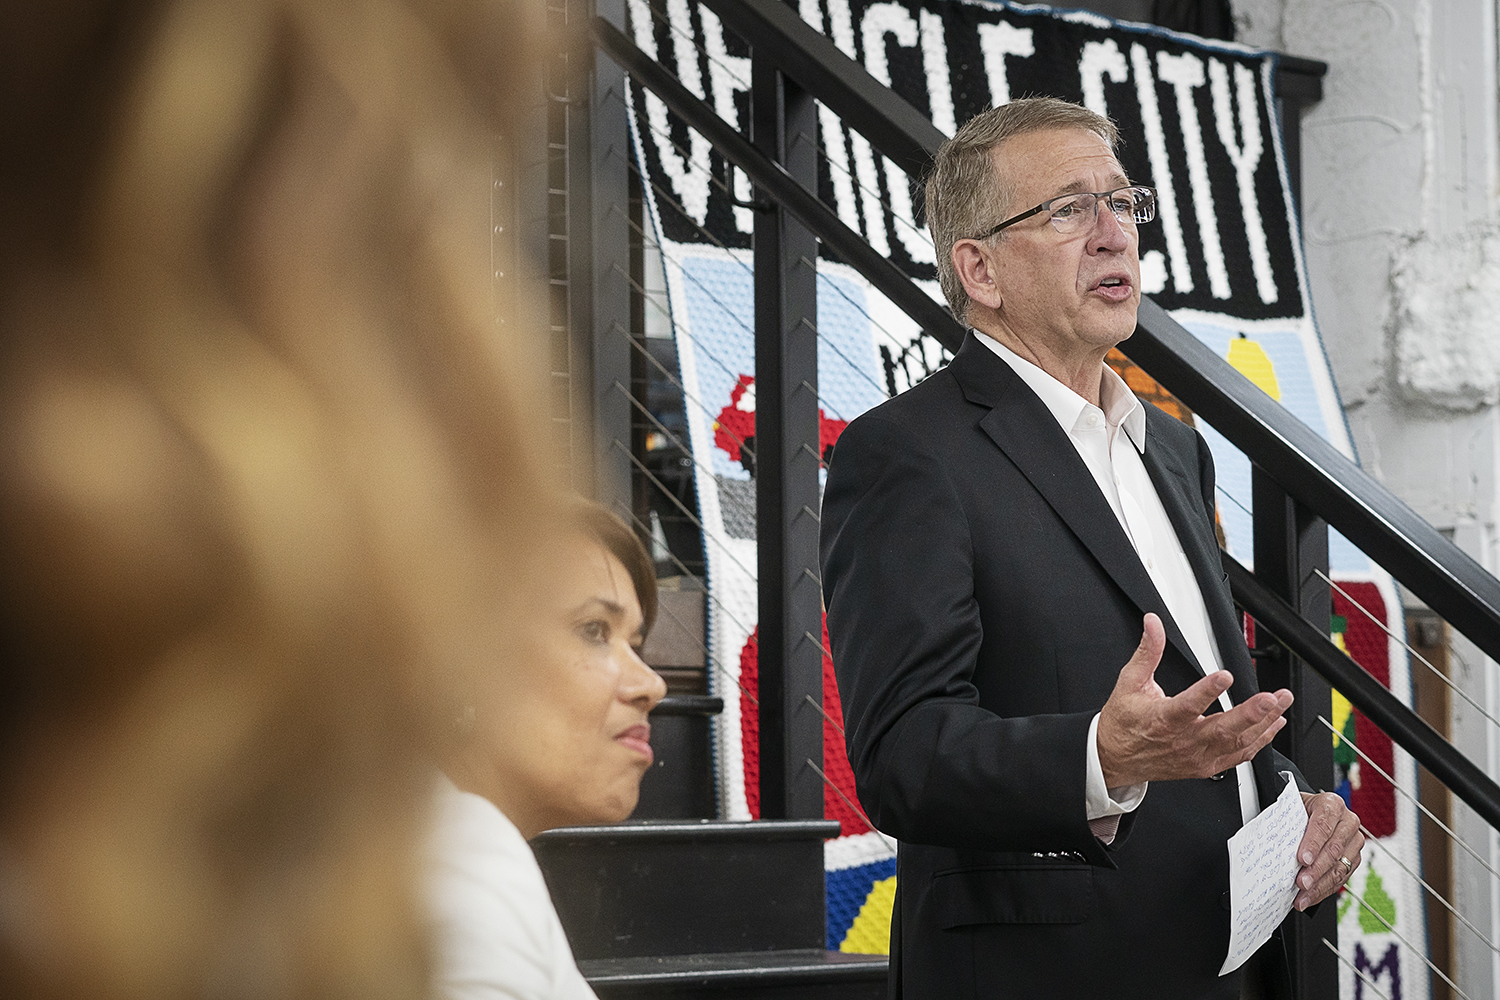 Flint, MI - Thursday, June 22, 2018: Skypoint Ventures founder and co-owner Phil Hagerman speaks to the crowd at The Ferris Wheel in Downtown Flint.